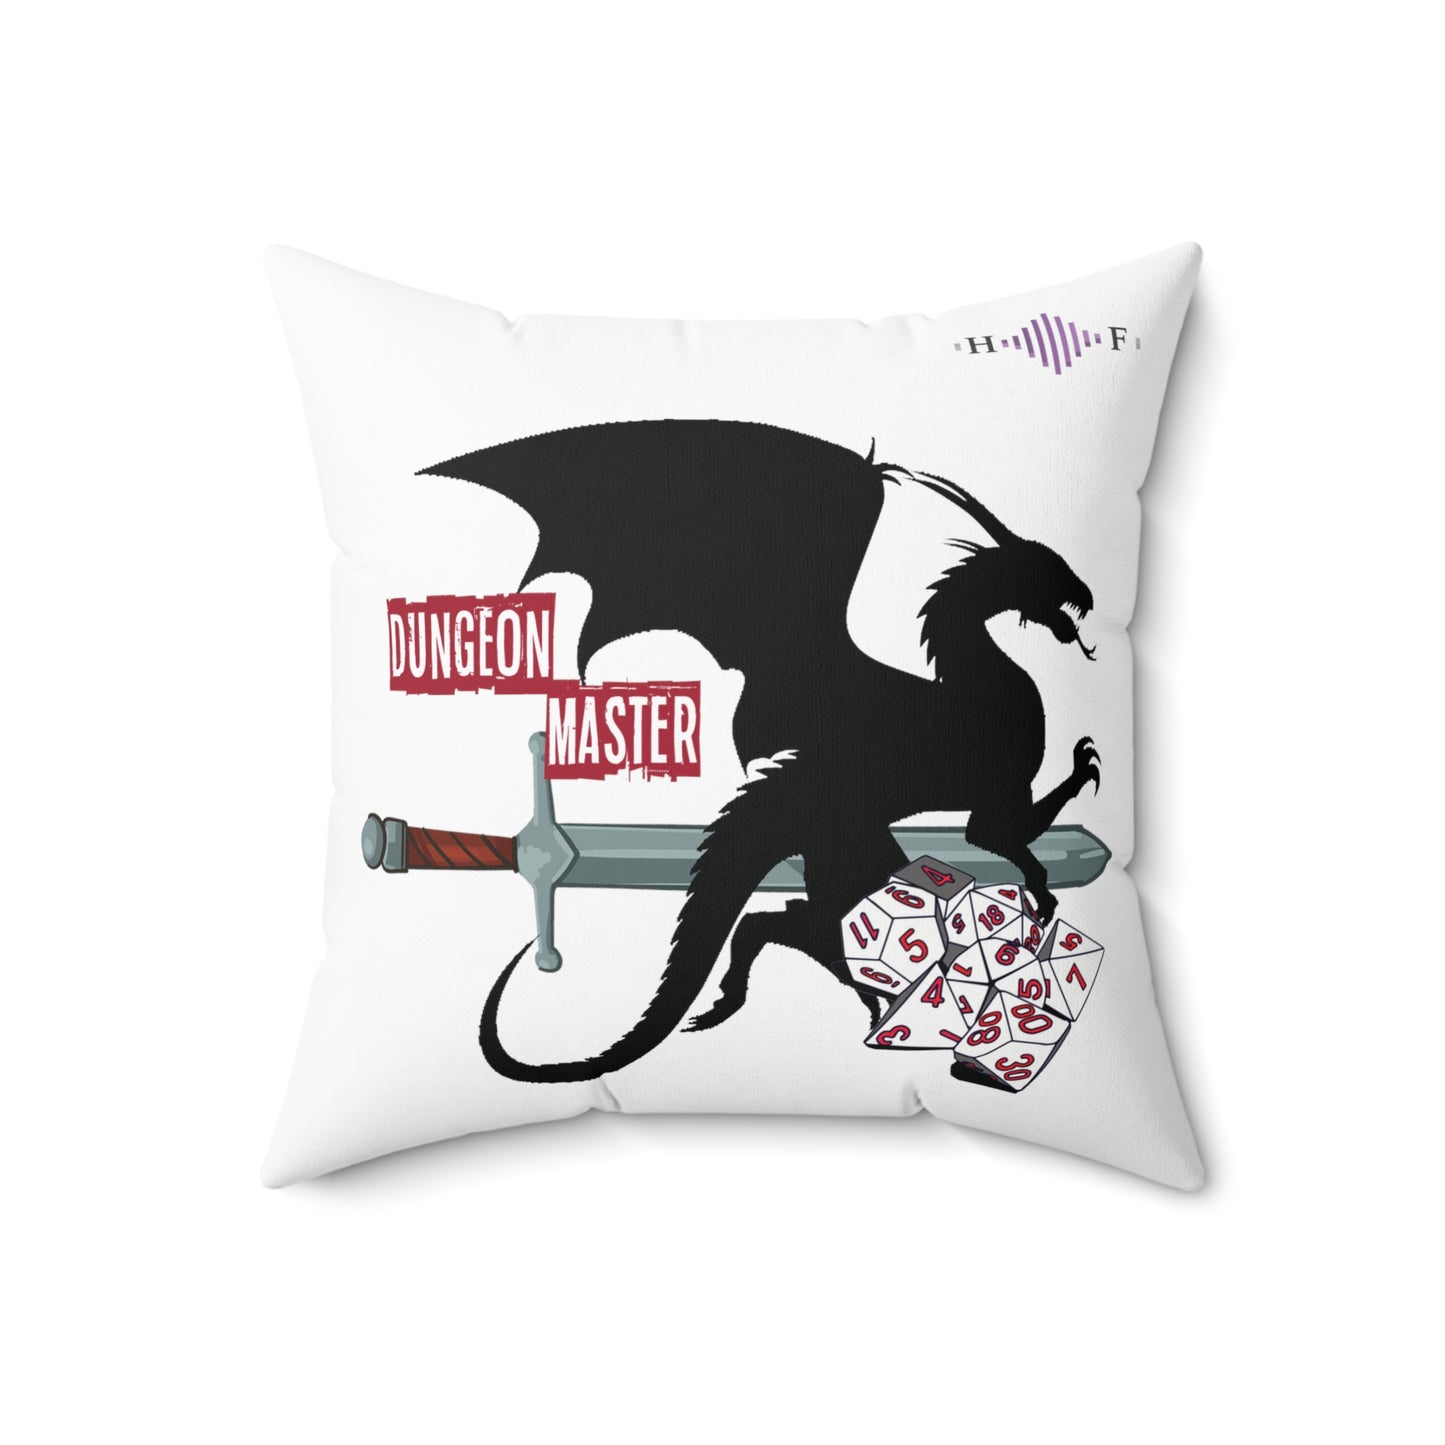 Dungeon Master - Square Pillow ( DM )